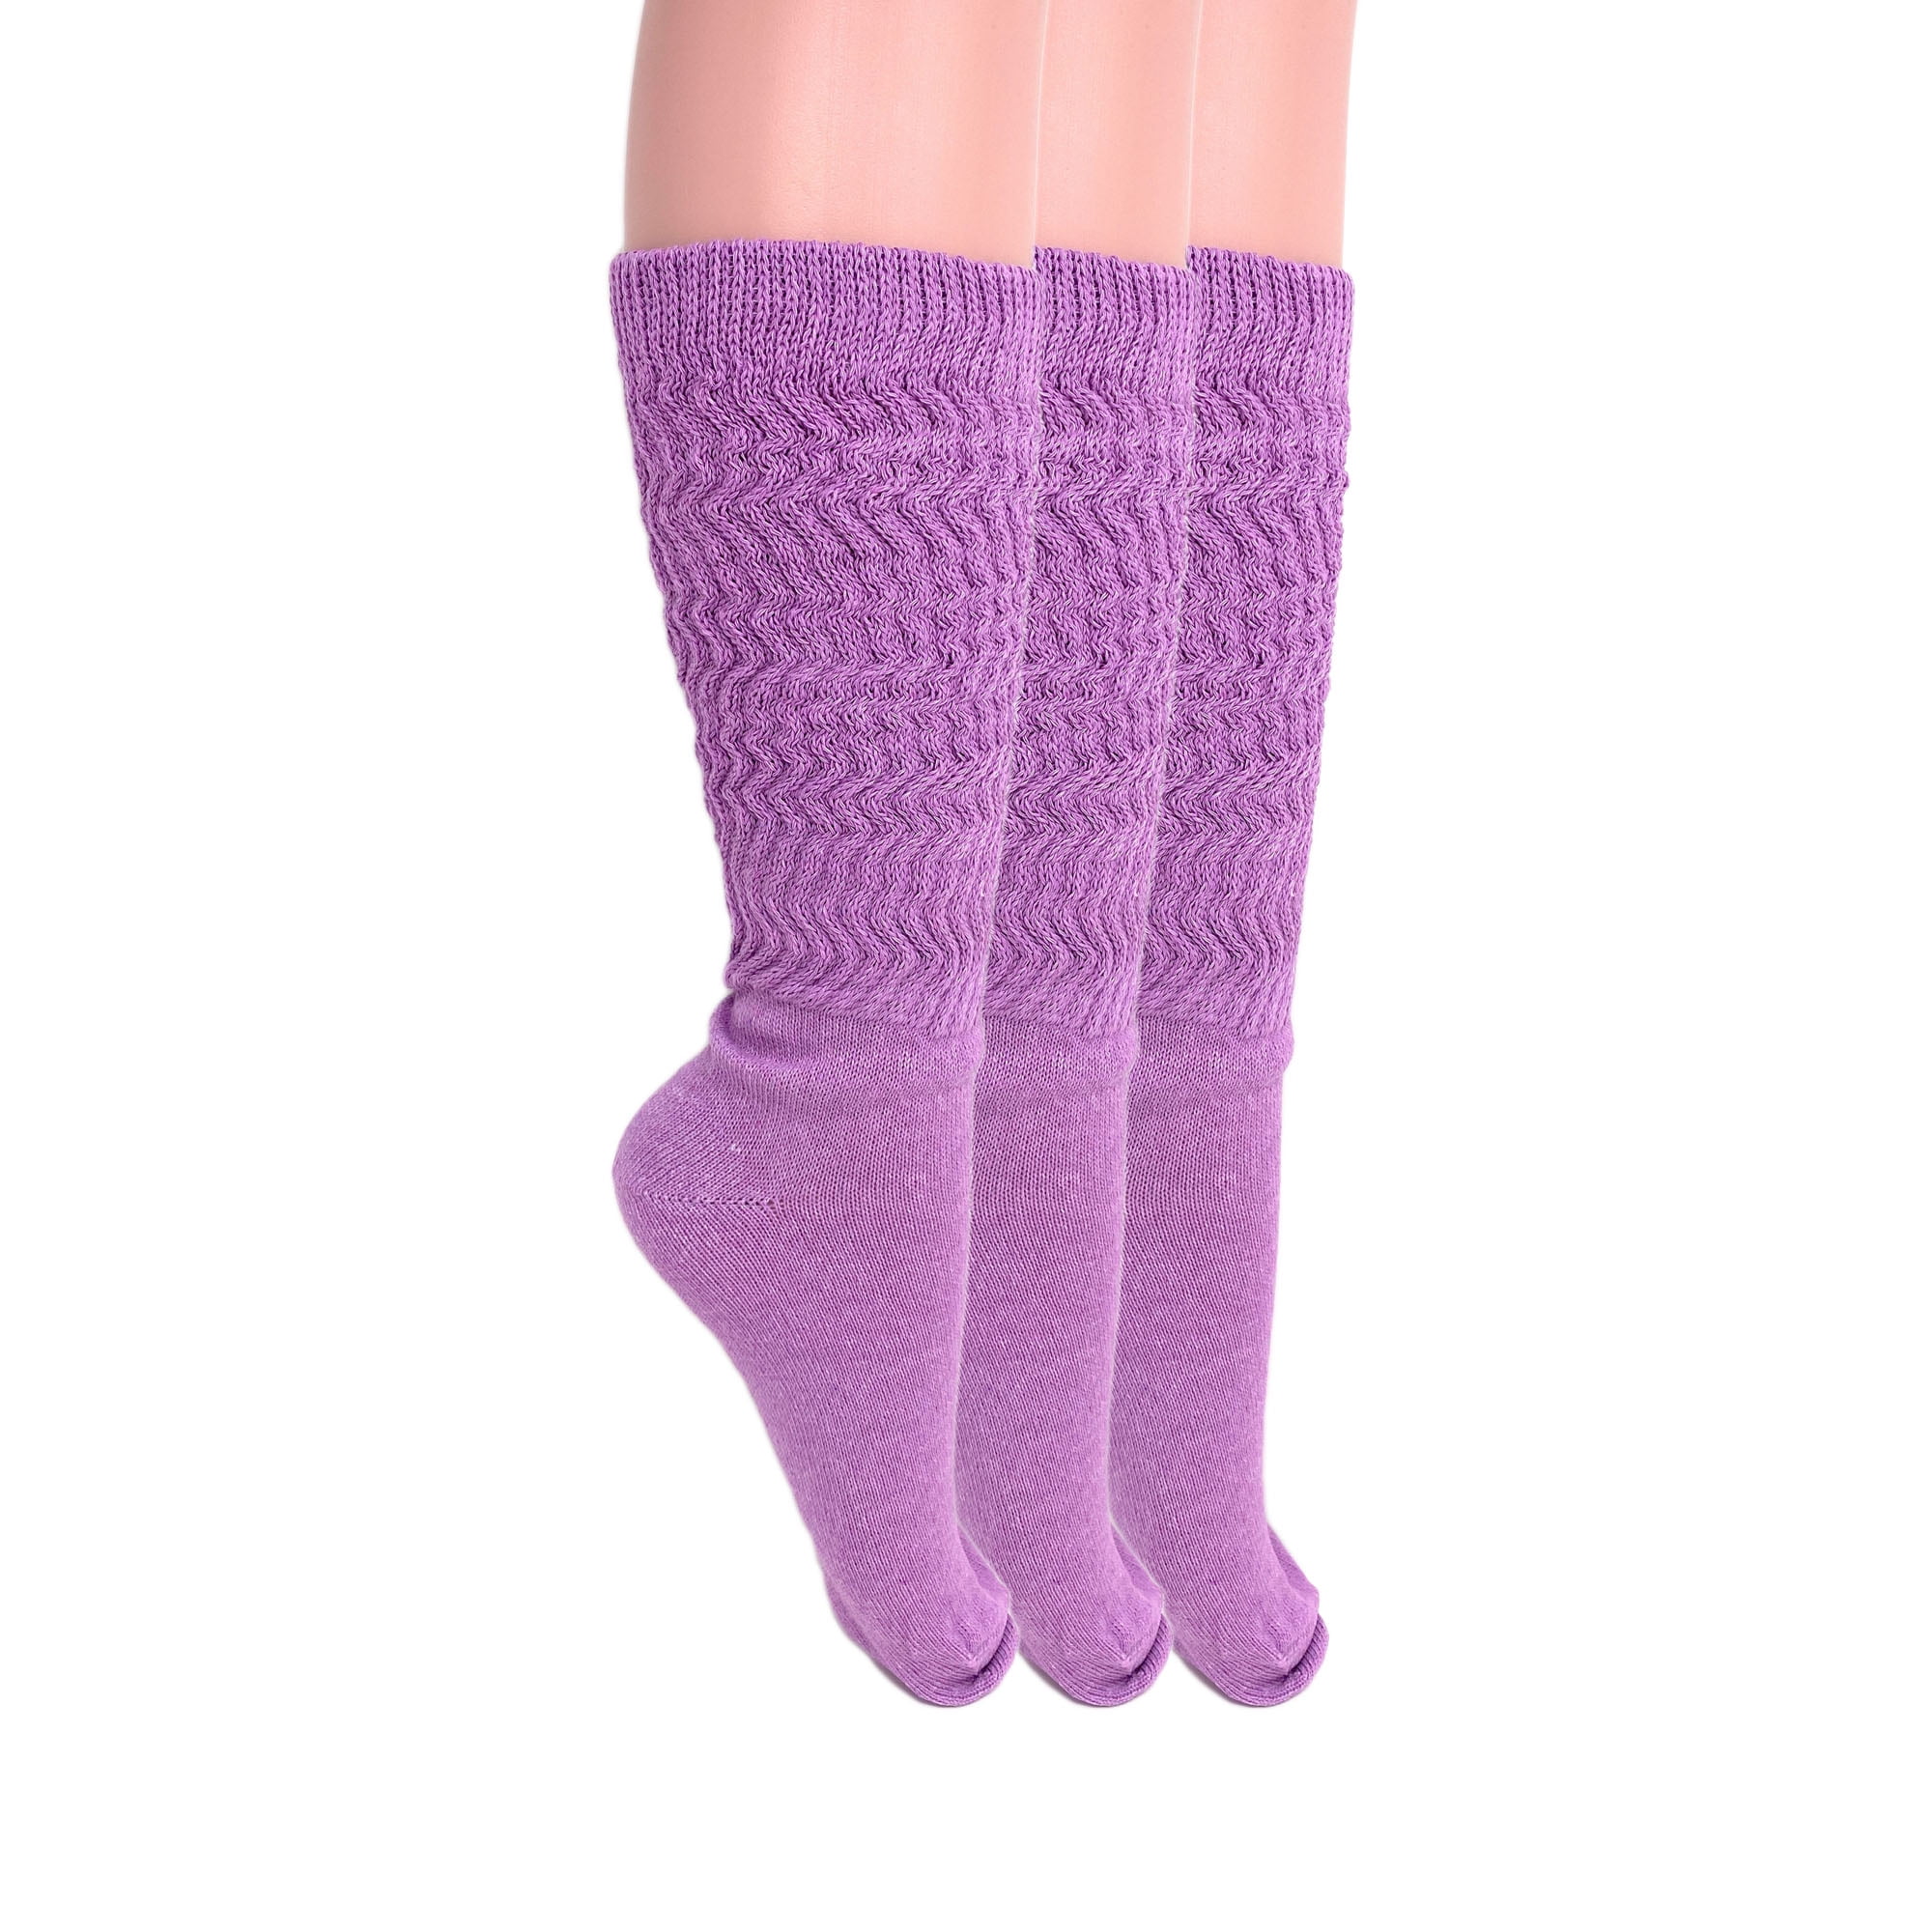 JYYYBF Women's Cable Knit Knee-High Winter Boot Socks Over Knee